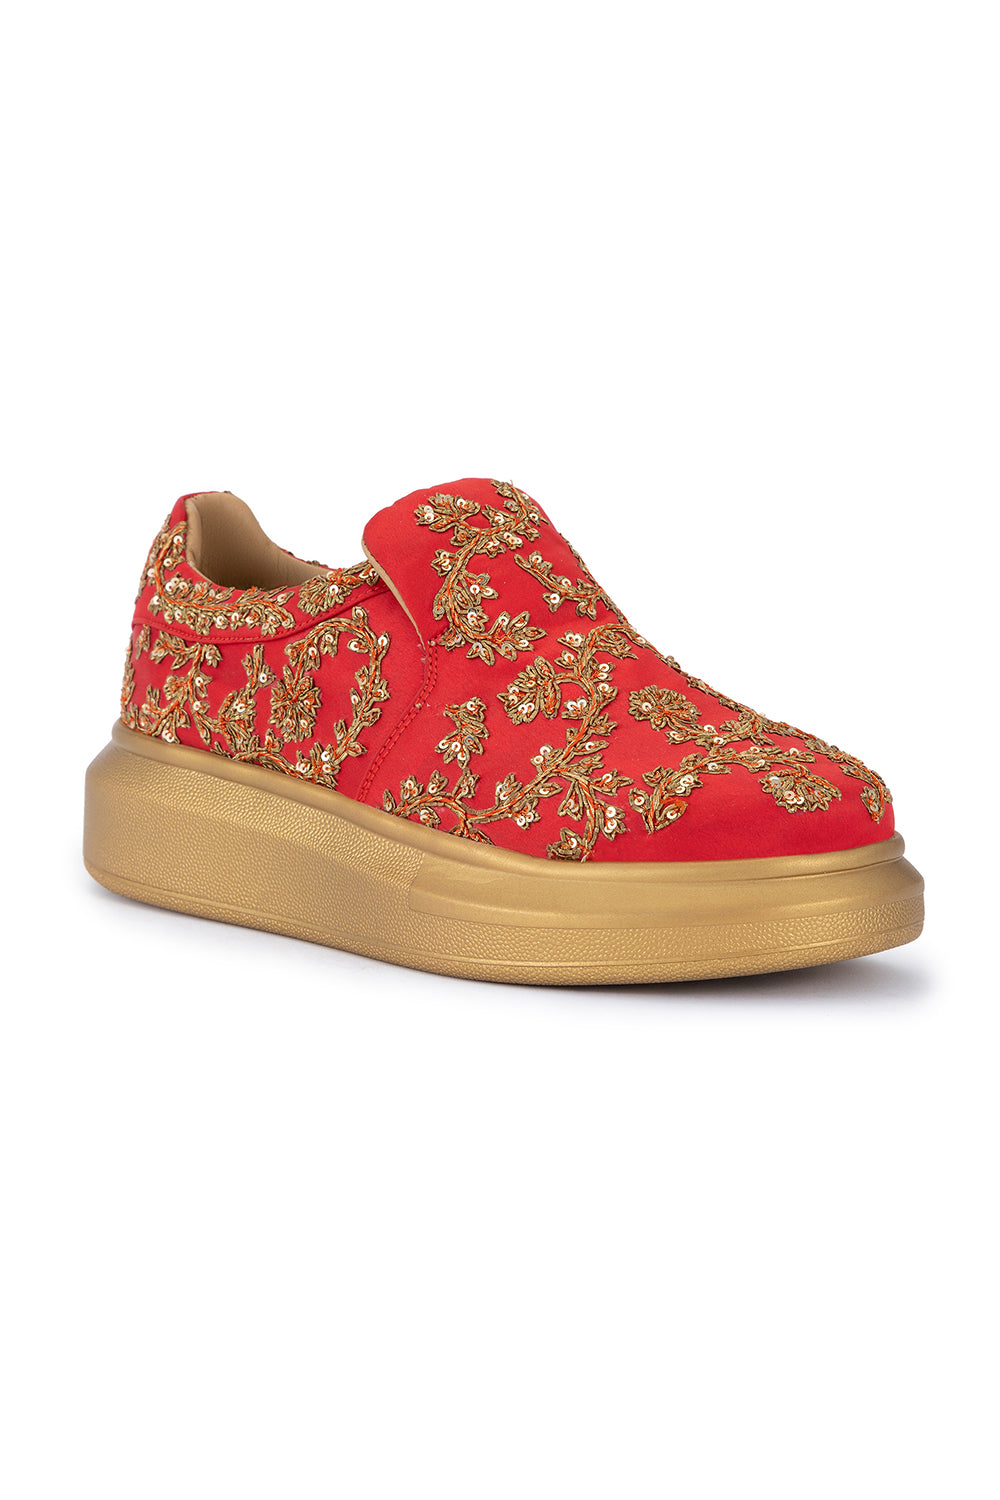 Tomato Red Heirloom Classic Wedge Sneakers